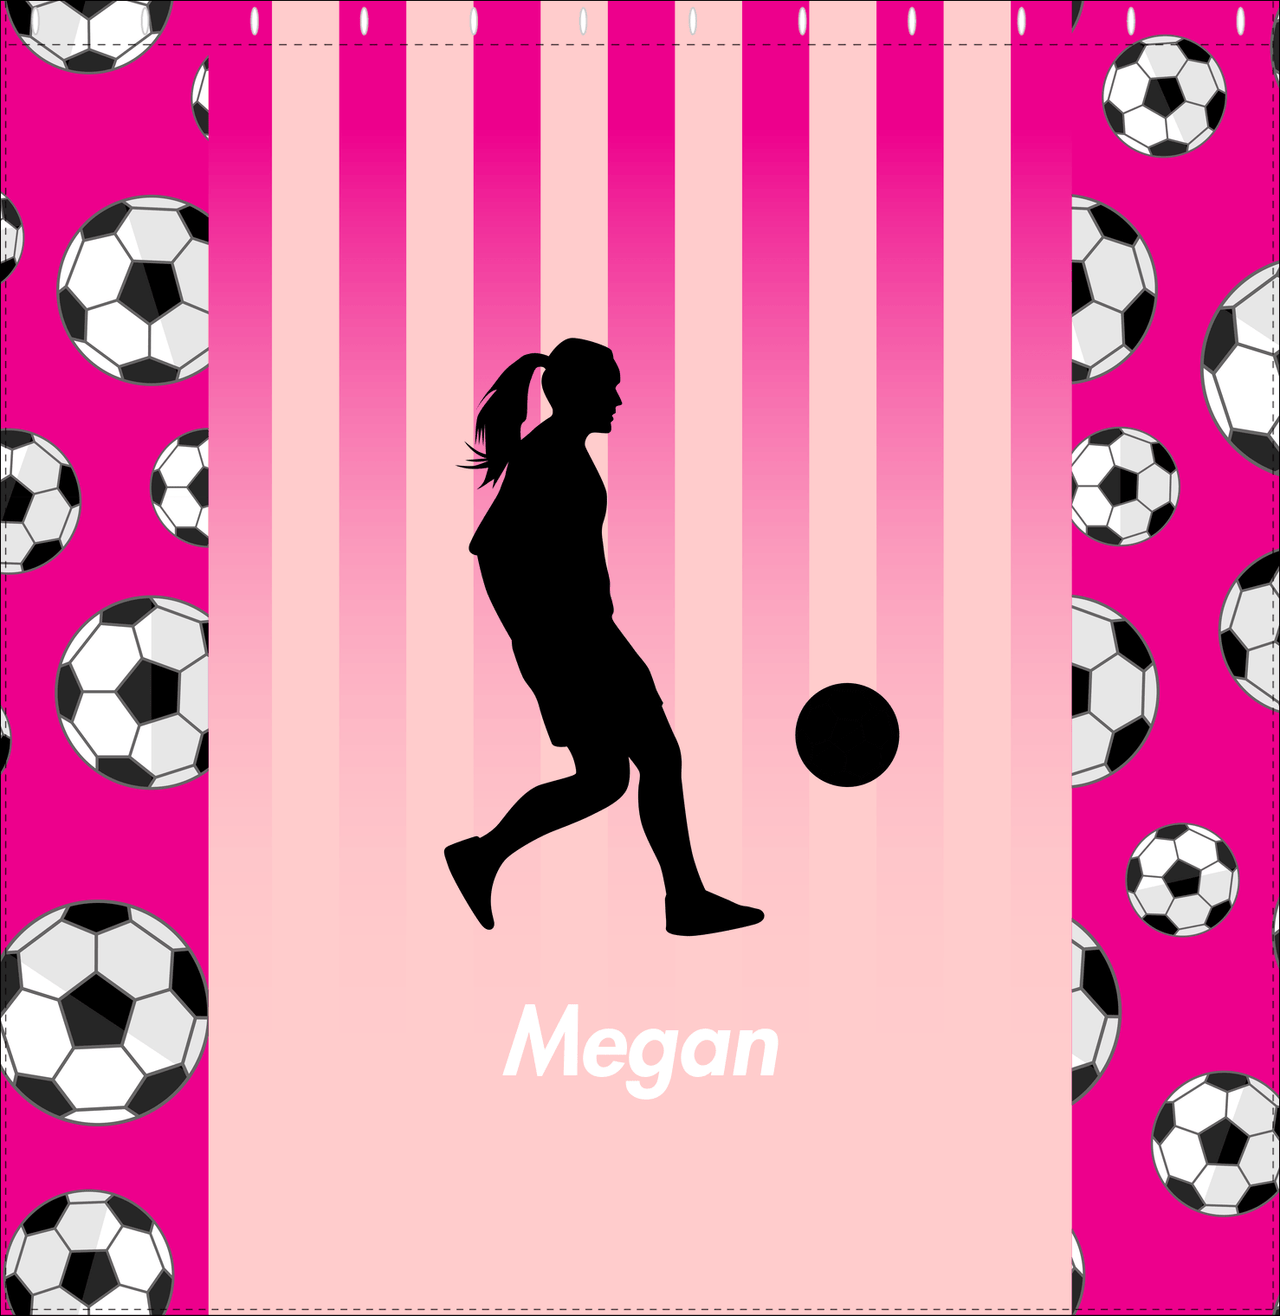 Personalized Soccer Shower Curtain LIV - Pink Background - Girl Silhouette V - Decorate View